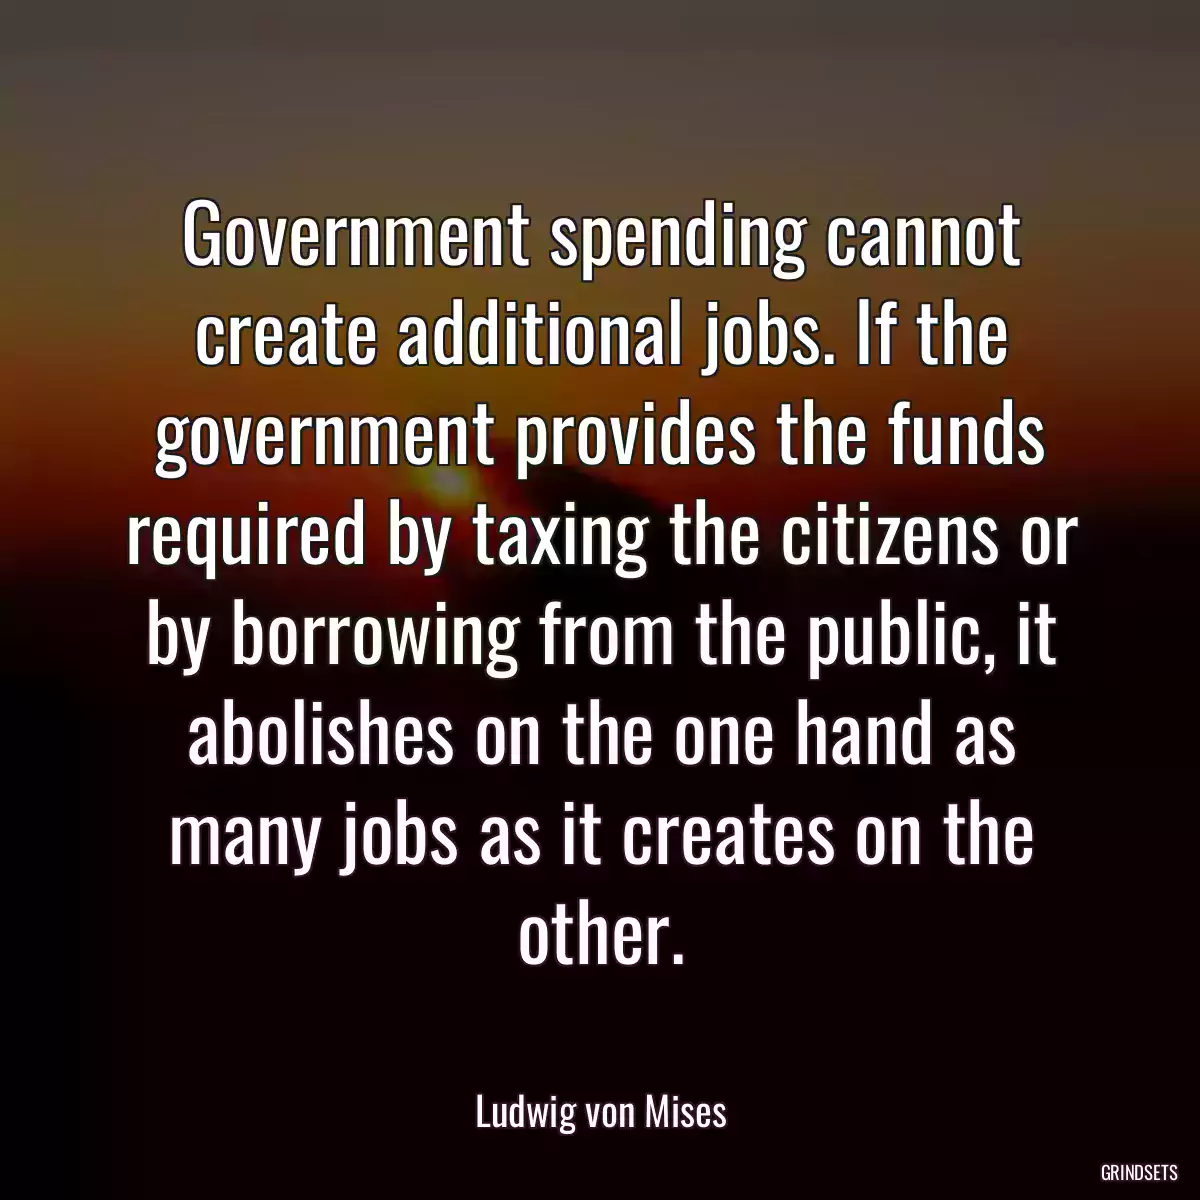 Government spending cannot create additional jobs. If the government provides the funds required by taxing the citizens or by borrowing from the public, it abolishes on the one hand as many jobs as it creates on the other.